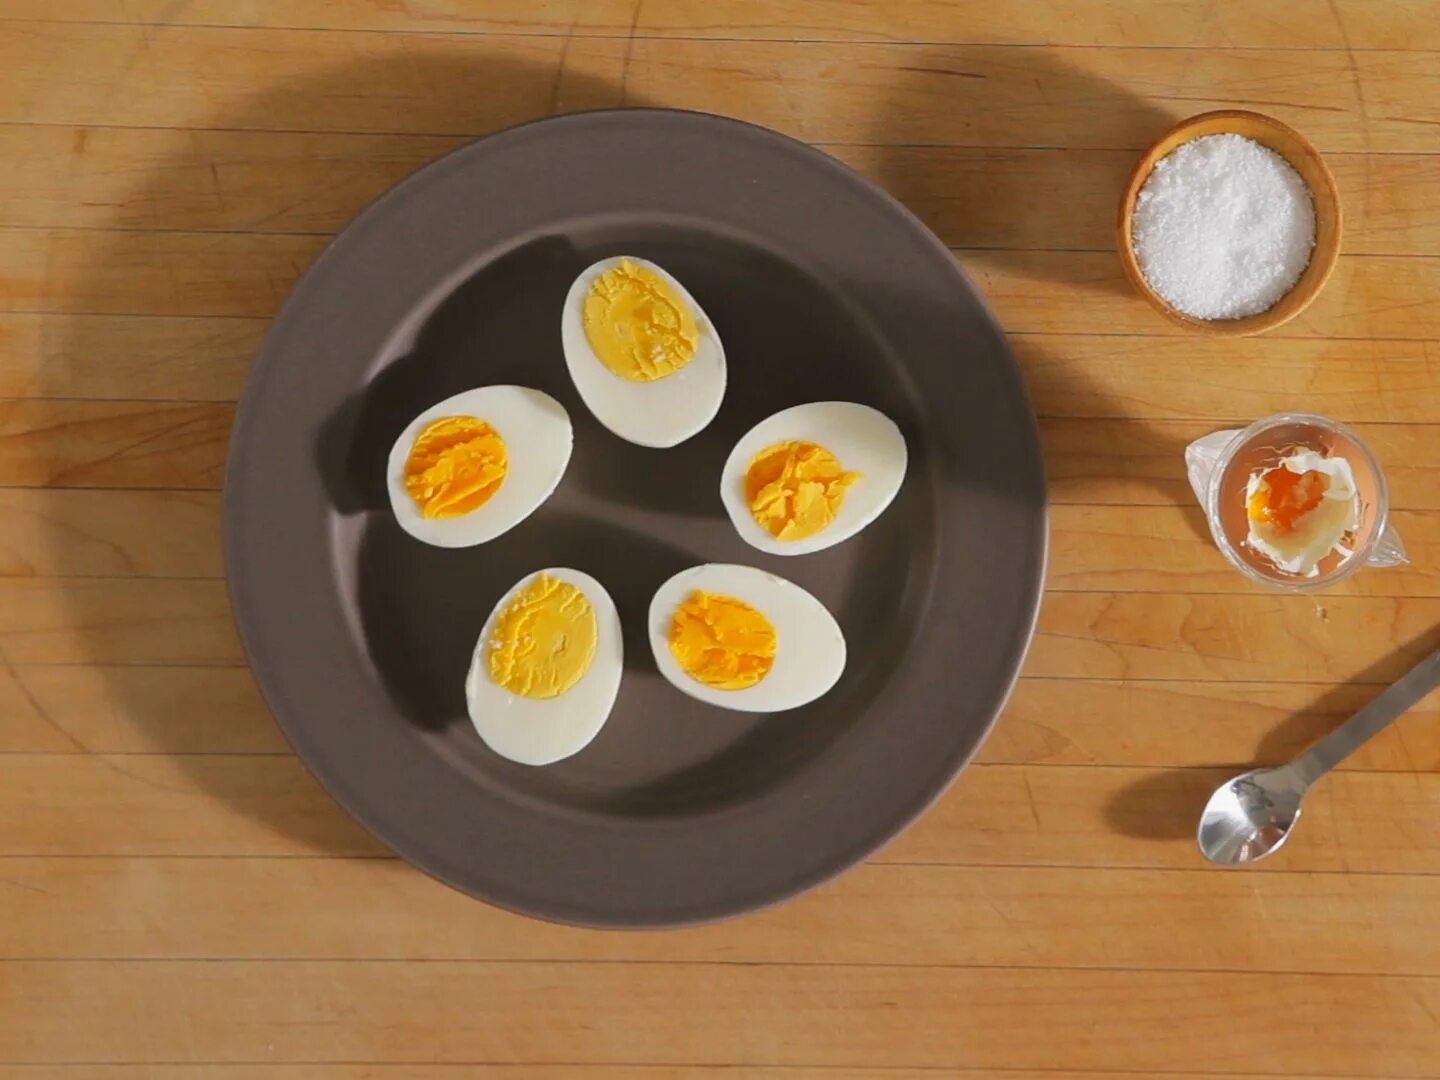 Cooked egg. Гриль яйцо встроенный Минимализм. How to Cook Eggs. Plate with boiled Eggs topview. Ways how to Cook Eggs.